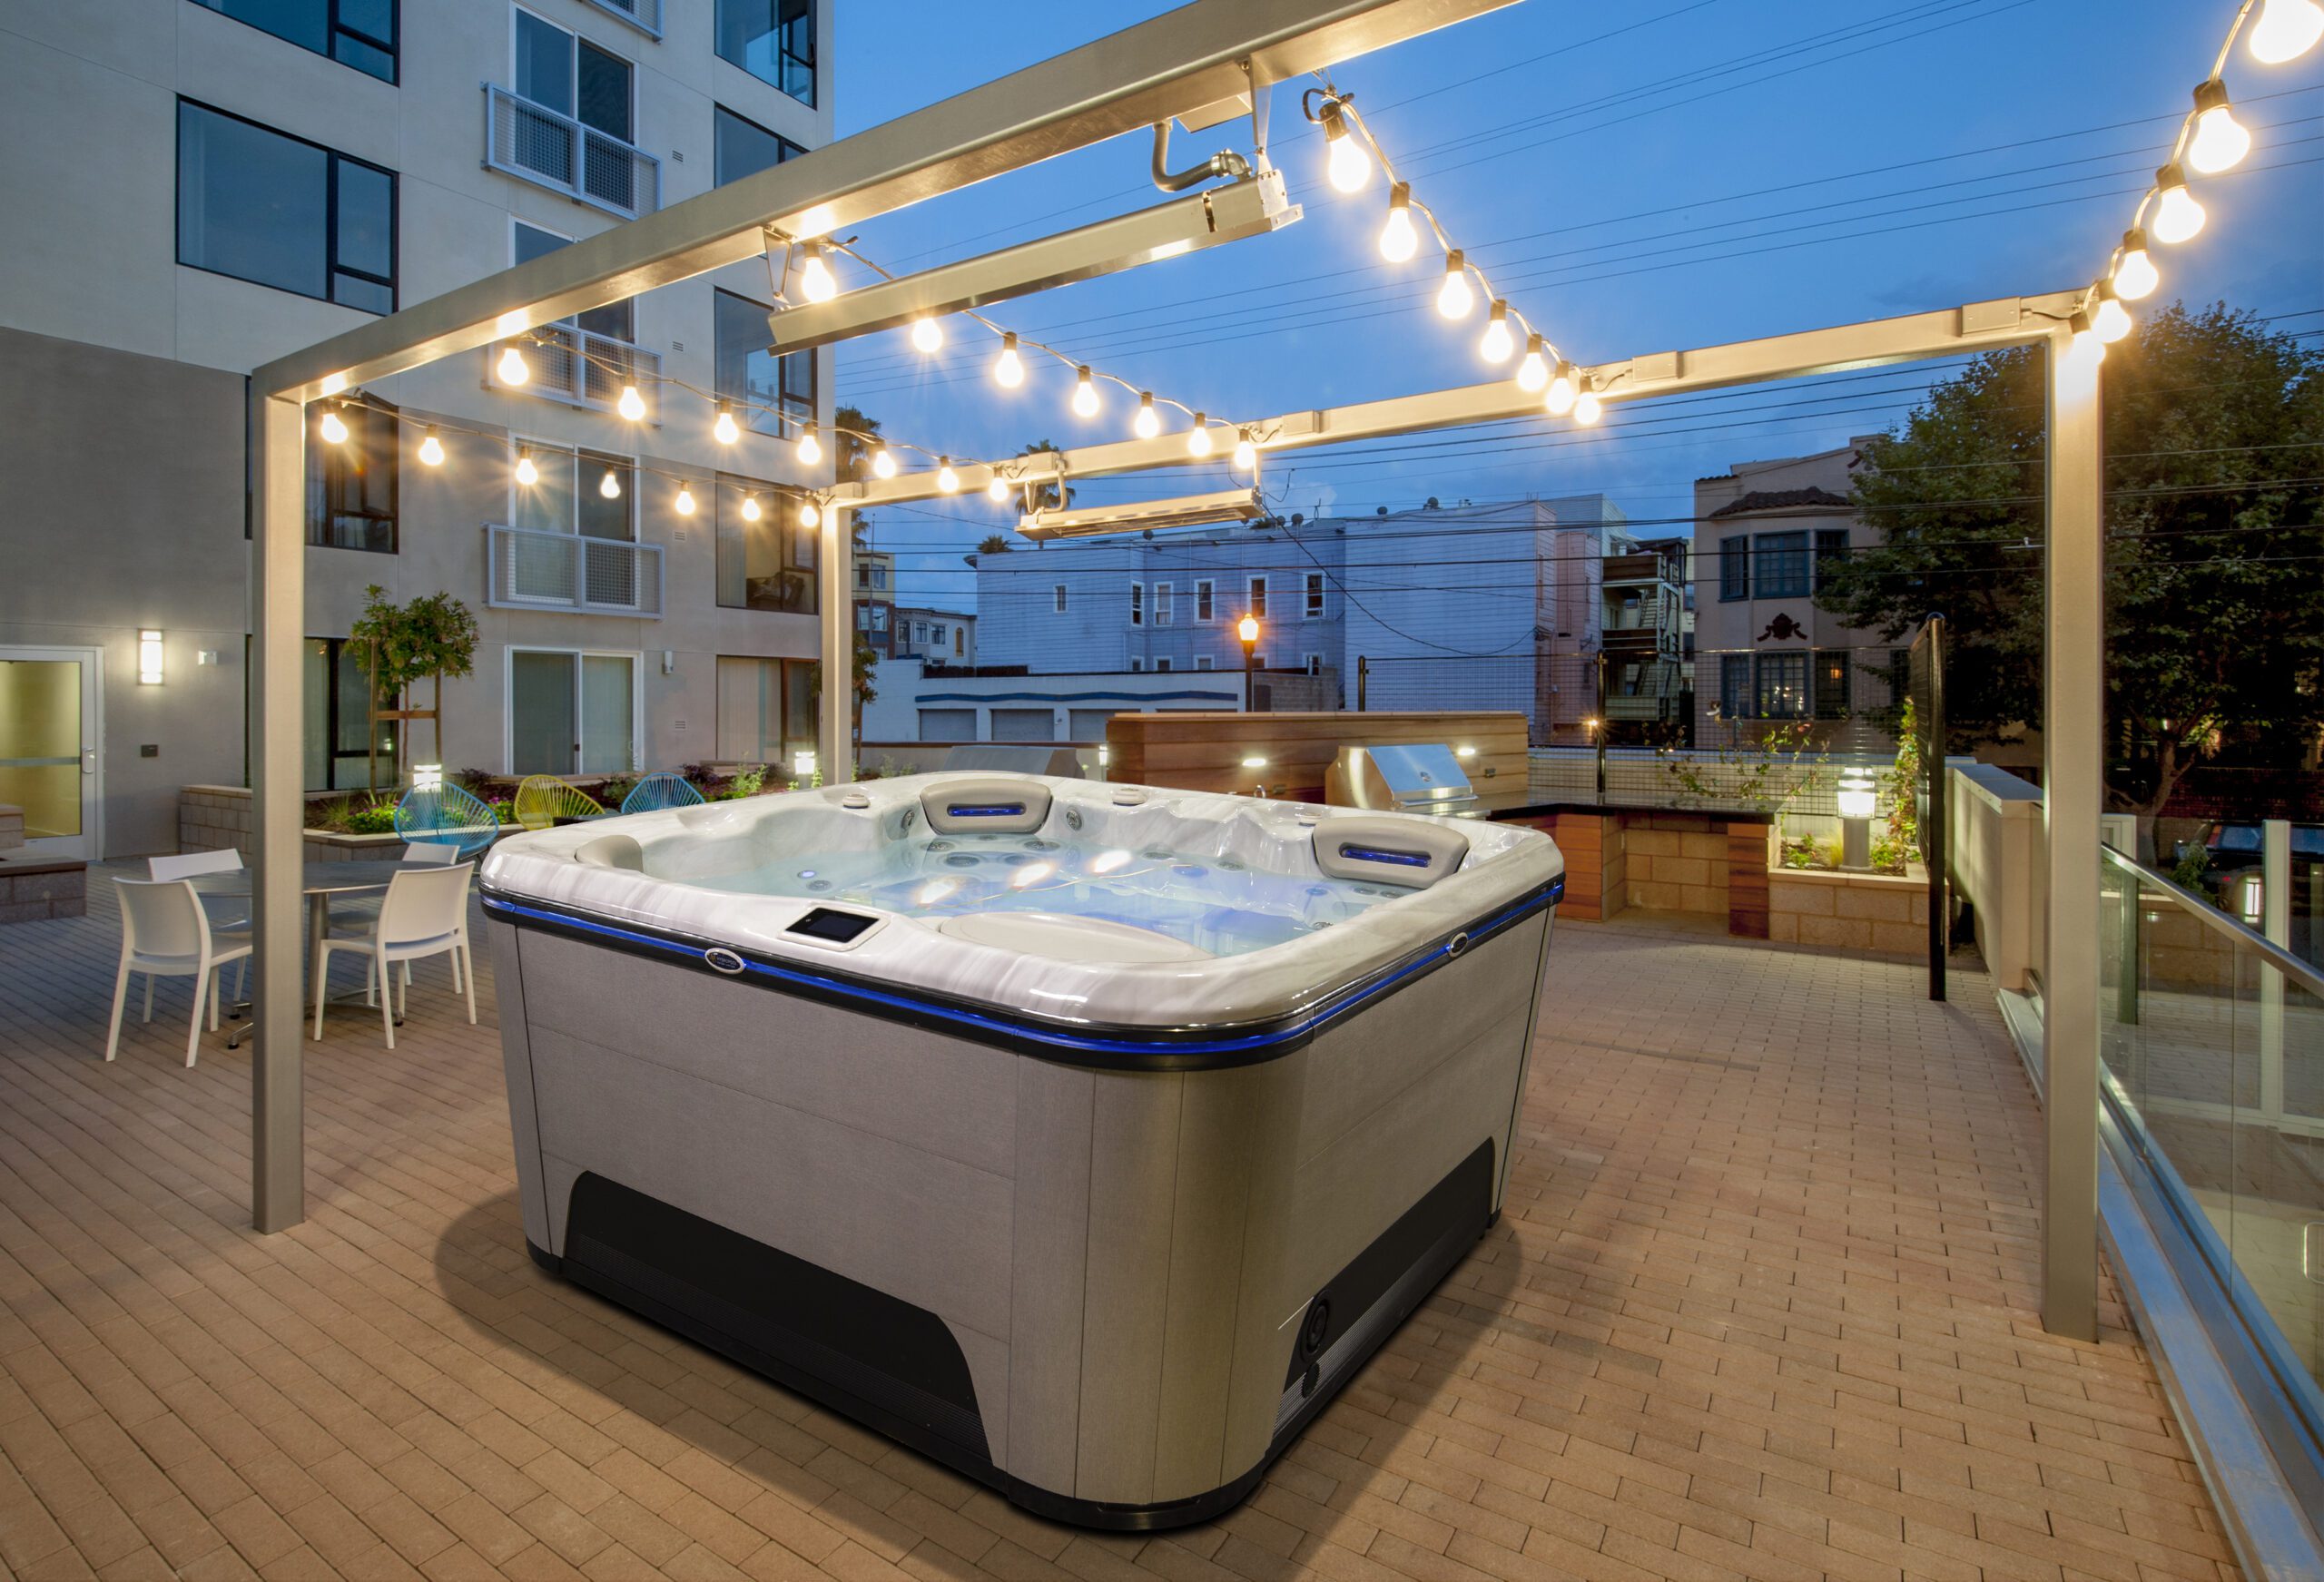 Outdoor Patio for Apartment Building and hot tub - Lunar Lagoons Ohio